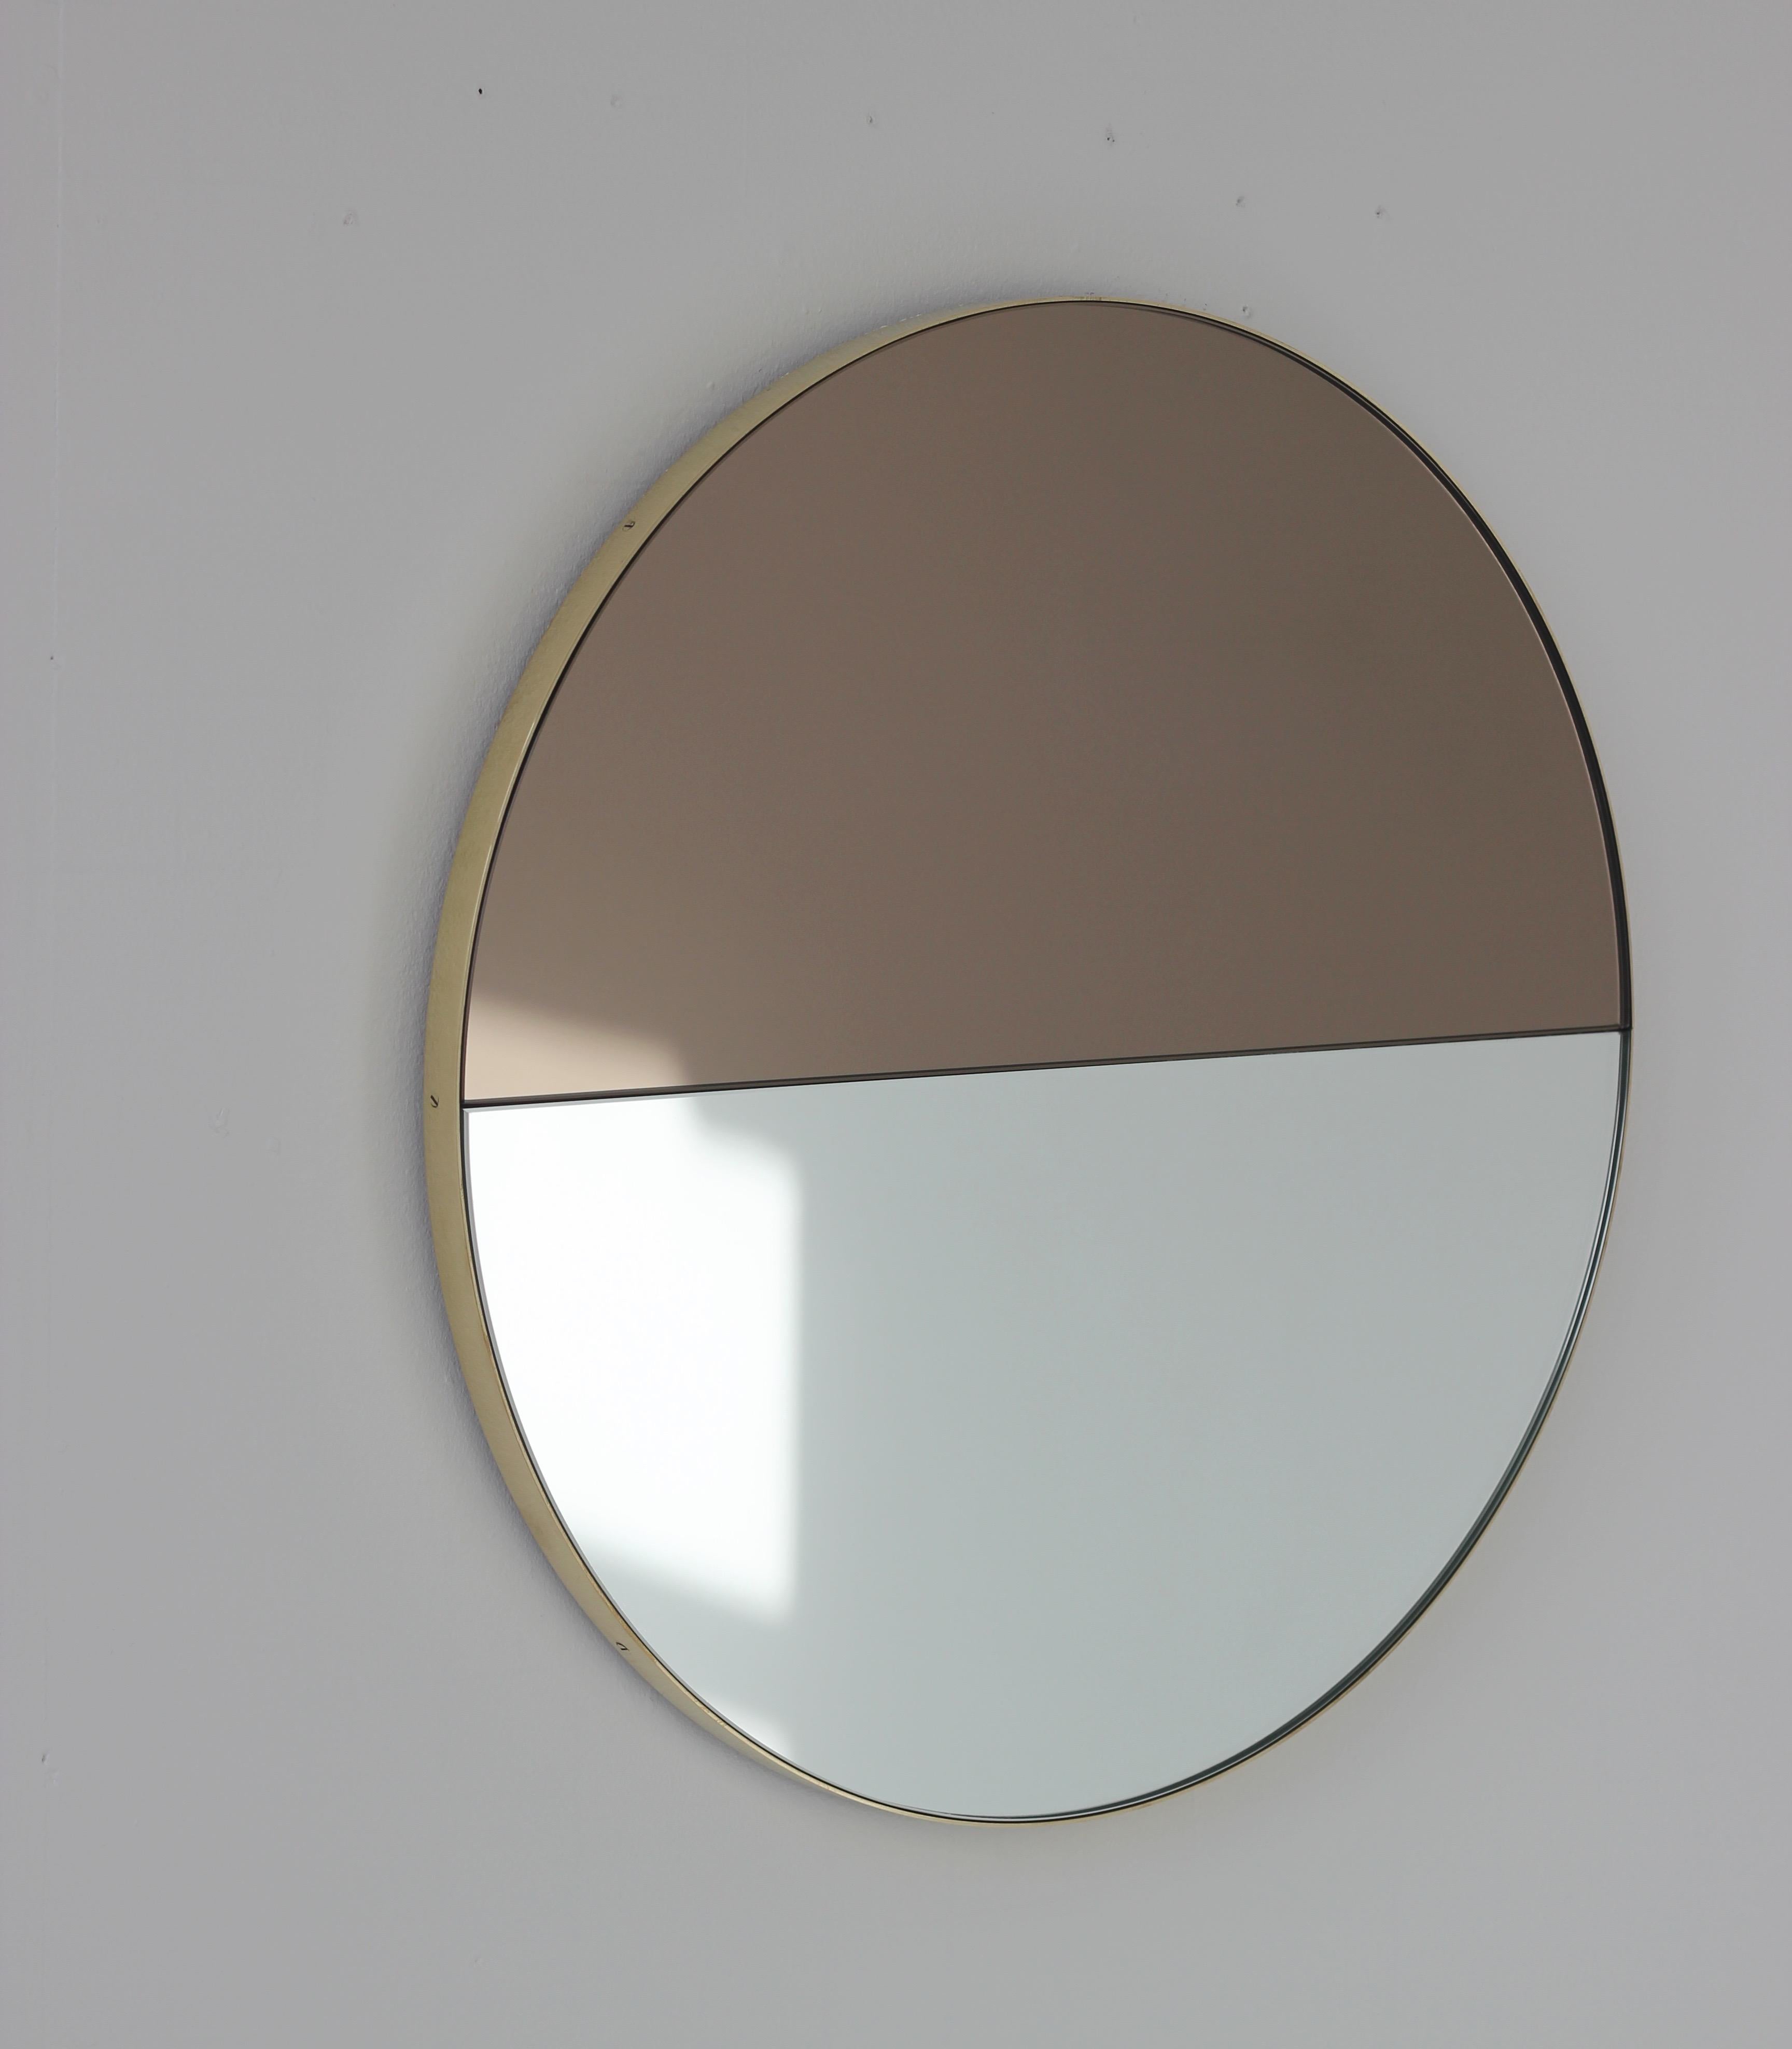 Brushed Orbis Dualis Mixed Tinted Silver Bronze Round Mirror with Brass Frame, Small For Sale